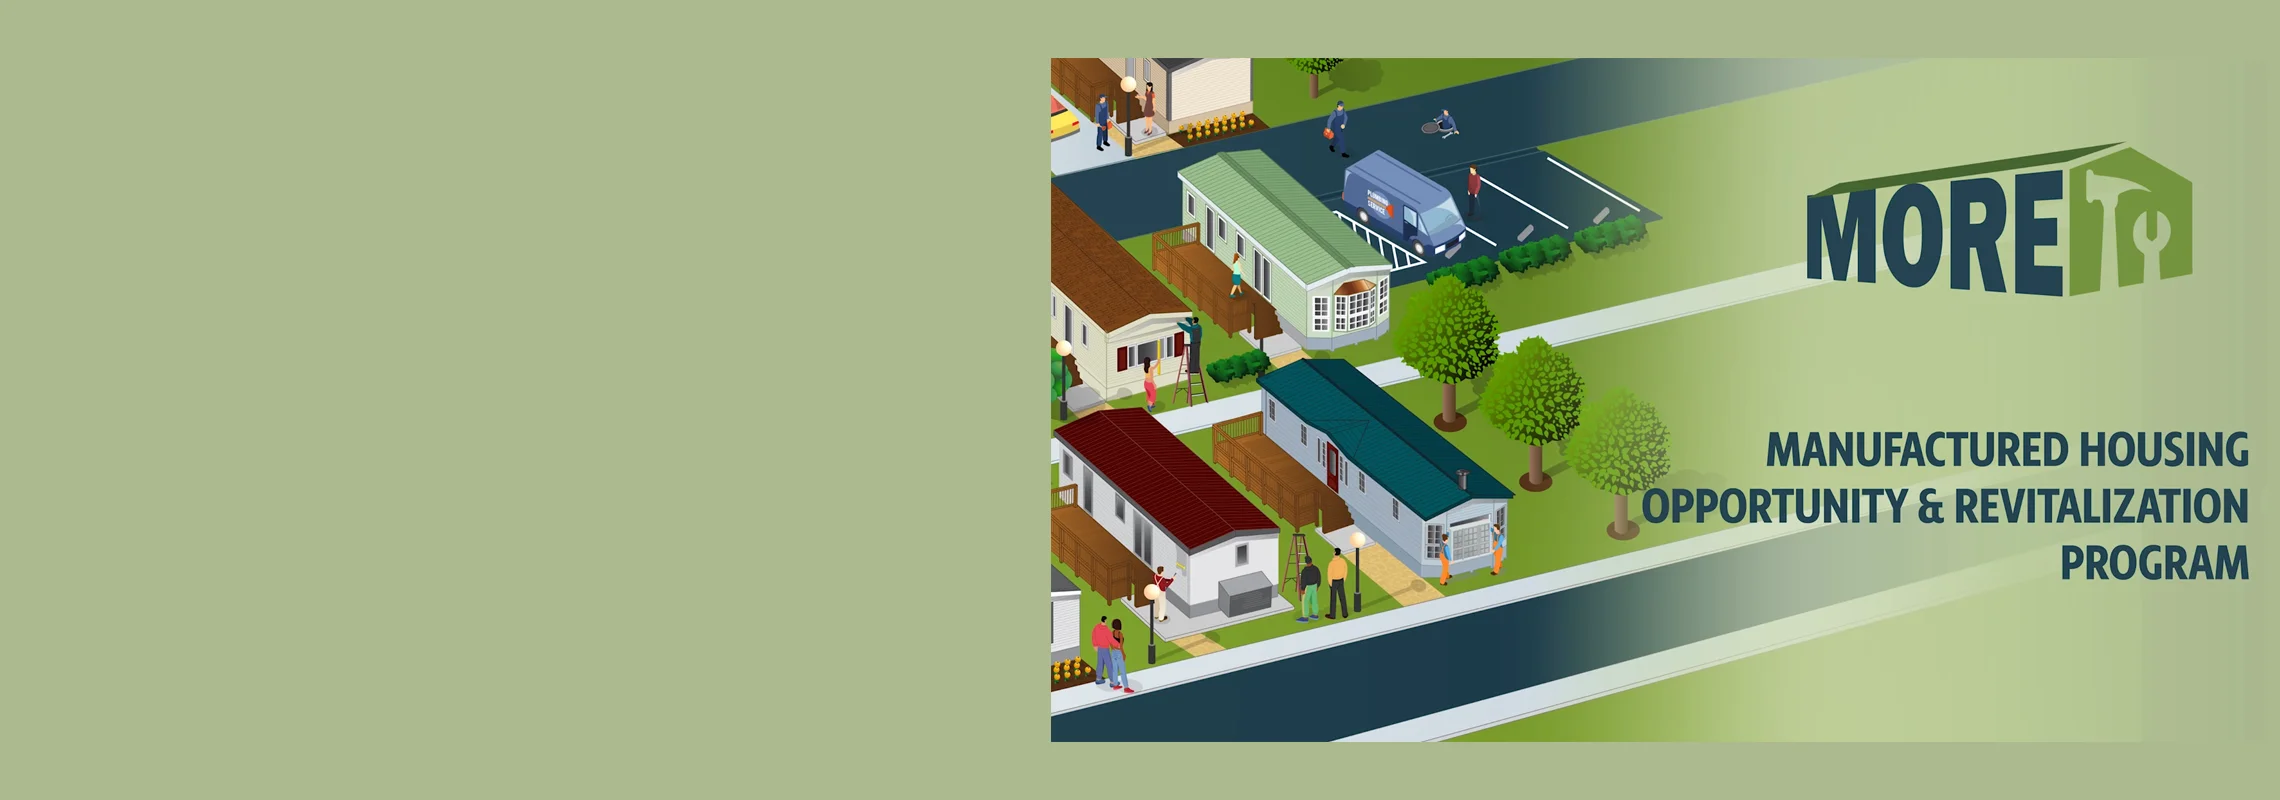 Graphic of mobilehome park and text MORE Manufactured Housing Opportunity & Revitalization Program